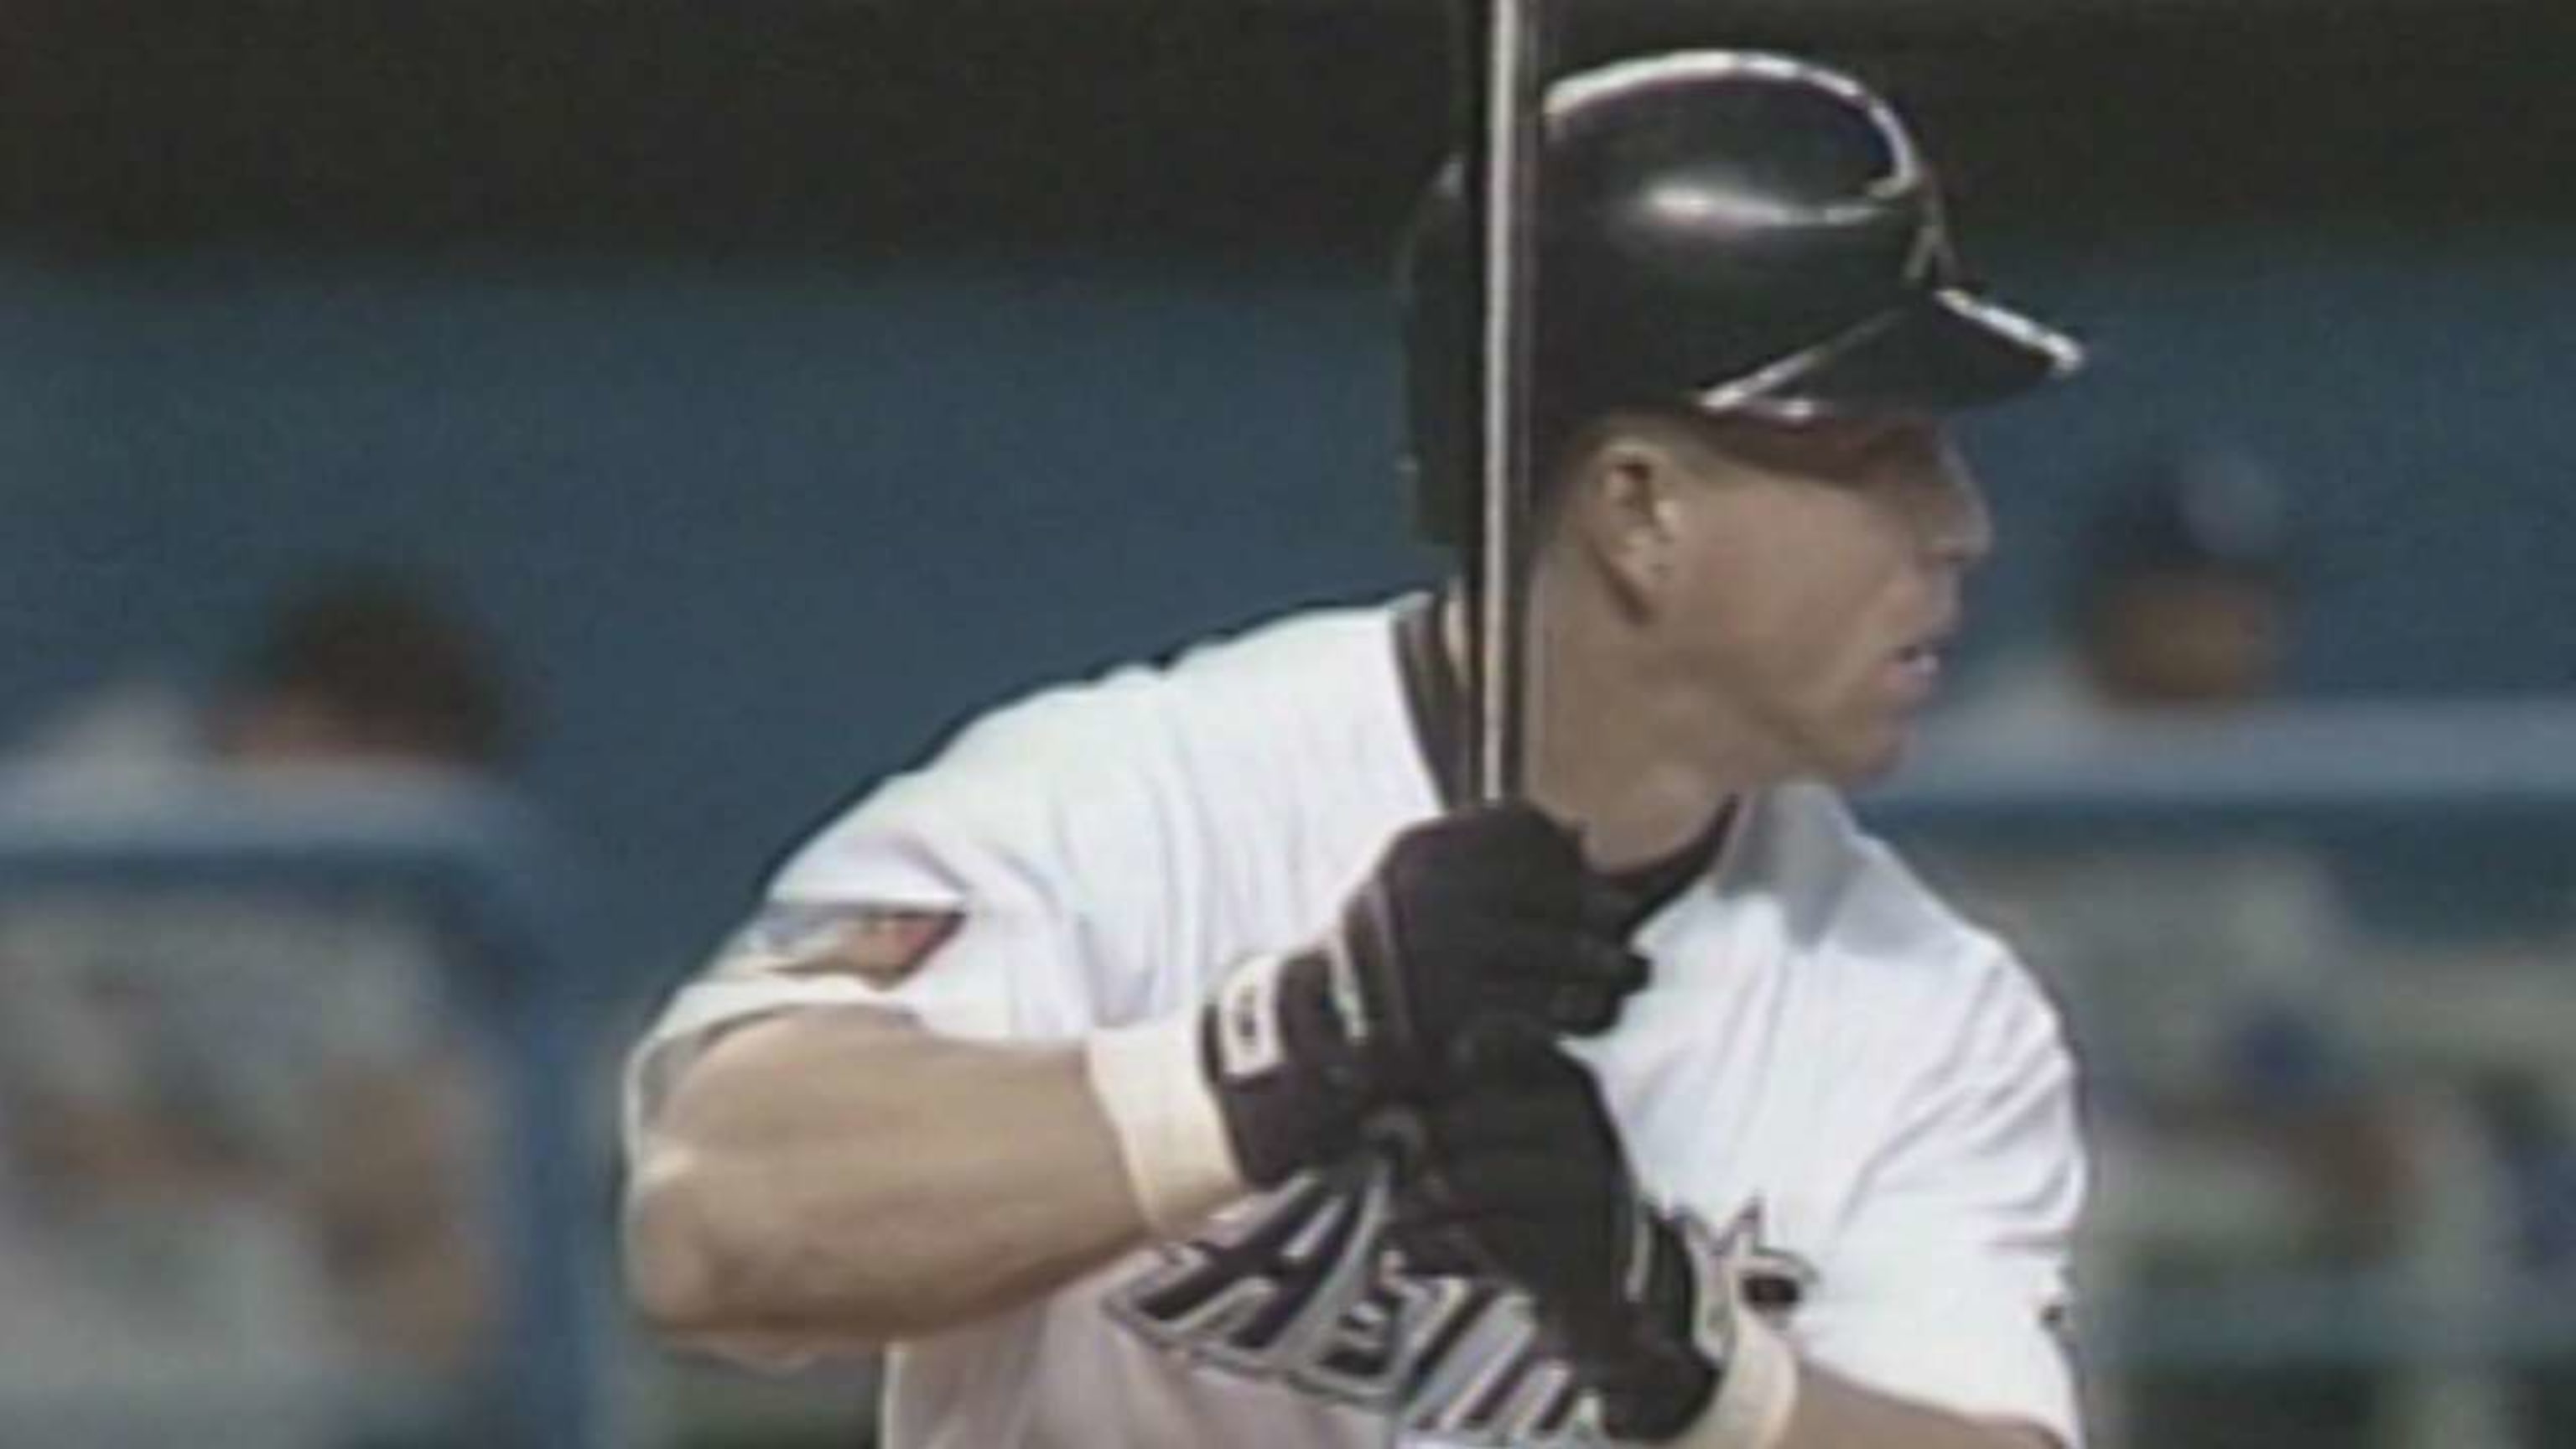 Craig Biggio and Jeff Bagwell were ecstatic about the Astros' World Series  win